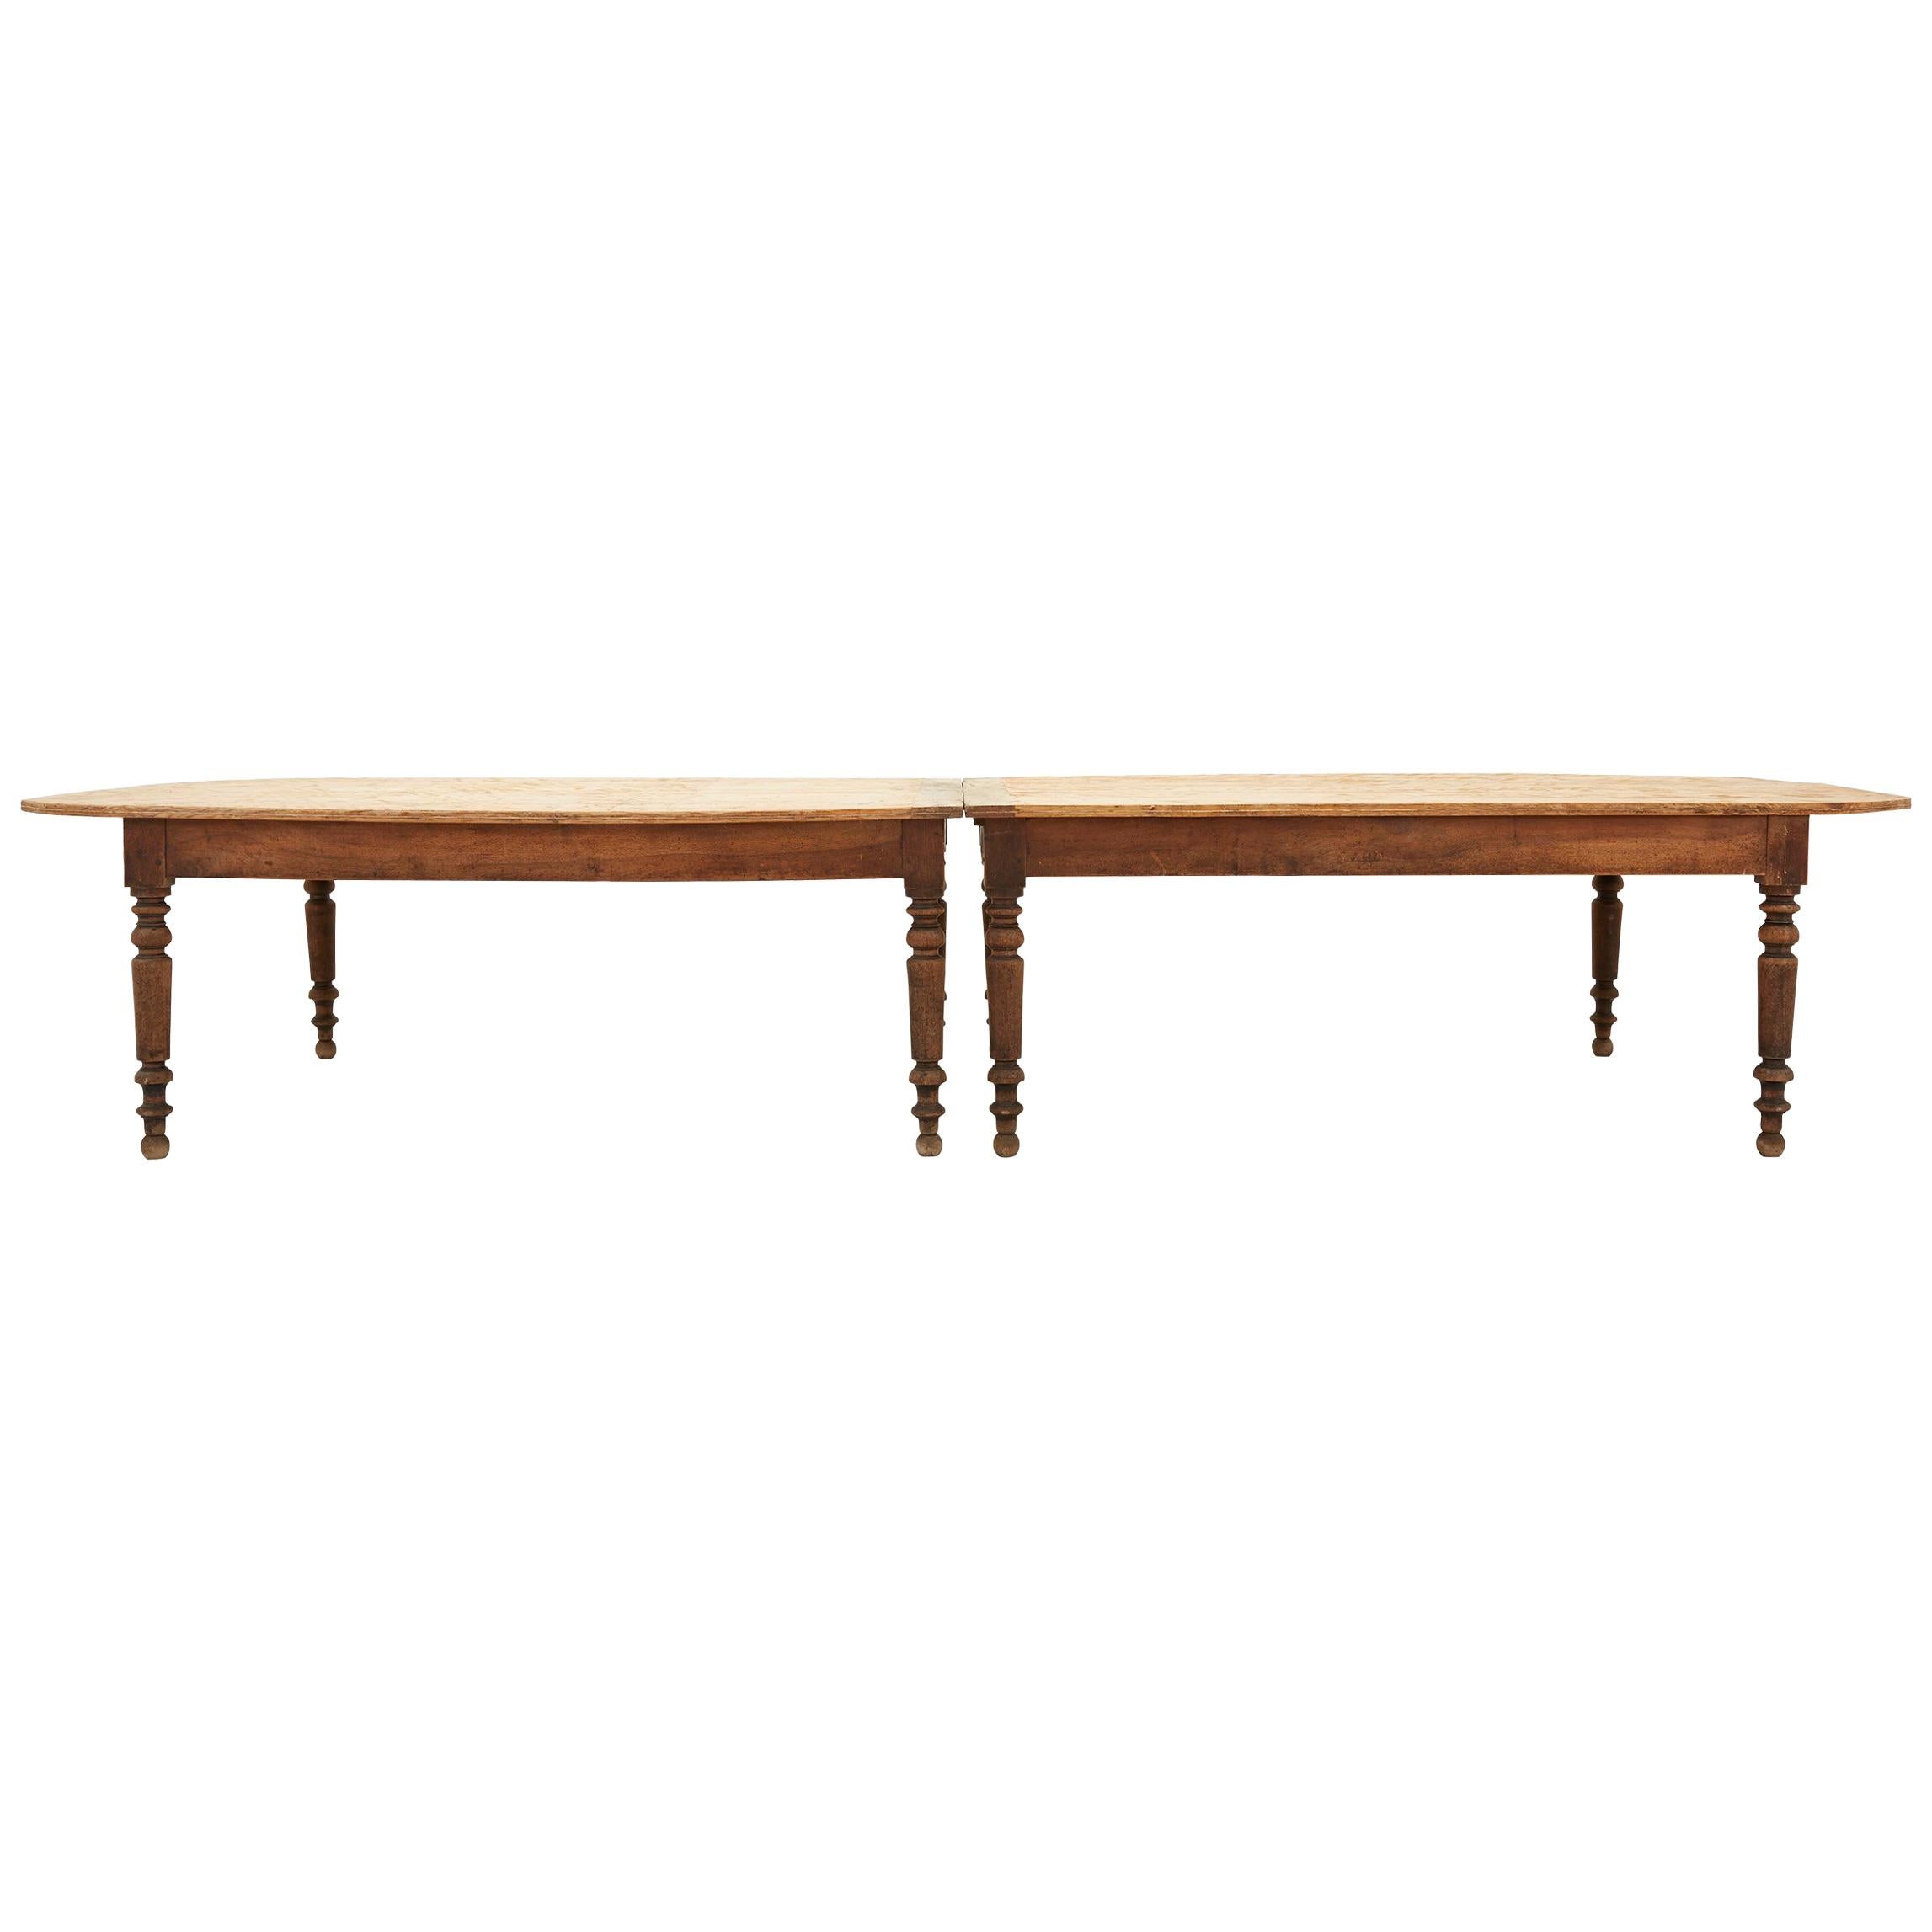 Stripped Wood Top Two-Piece Schoolhouse Lunch Table